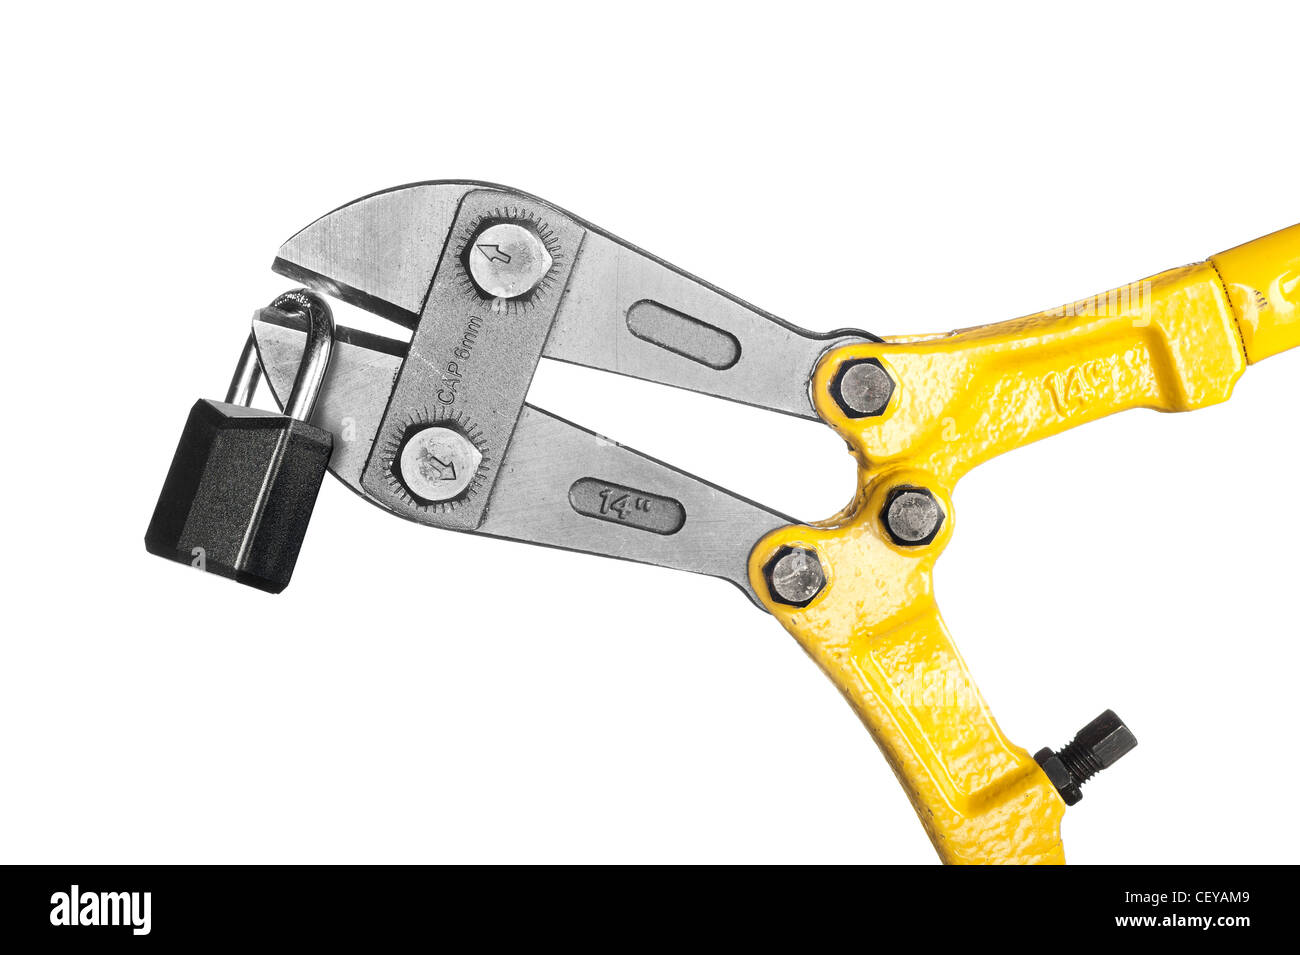 New, yellow bolt cutters with sharp pincers cutting a lock, isolated on white. Stock Photo